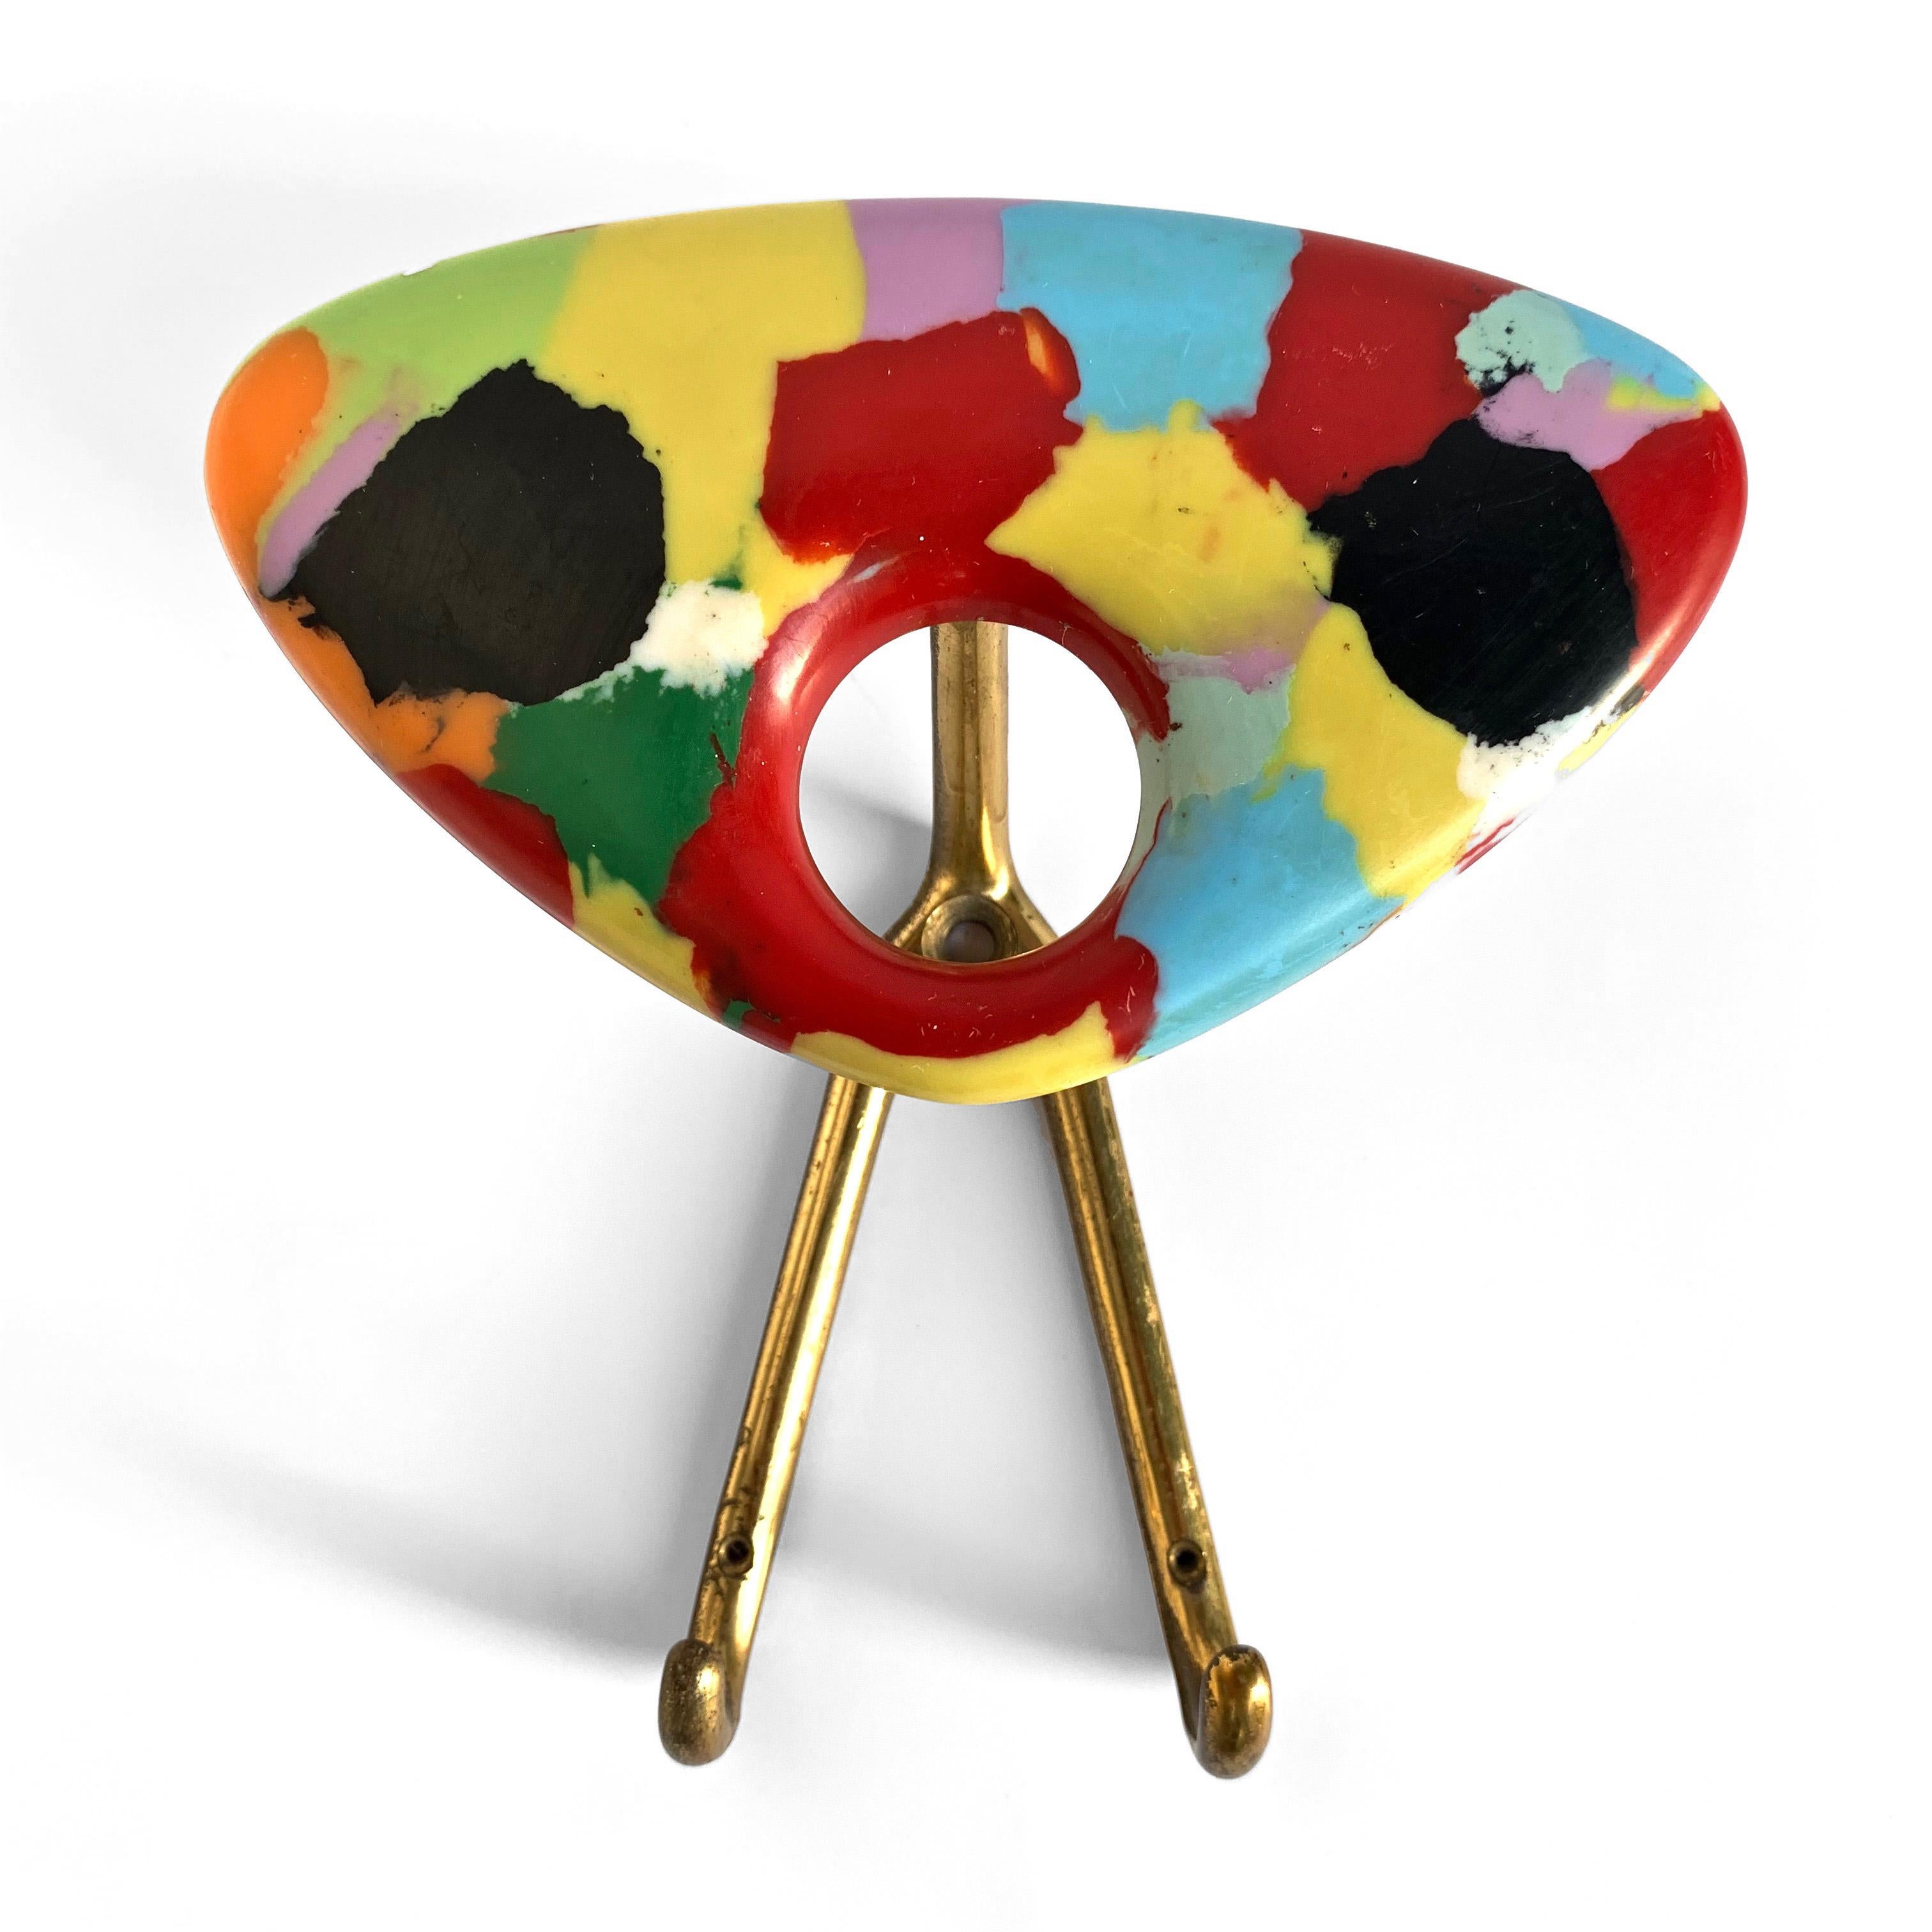 Mid-Century Modern Coat Hanger Made of Multicolored Plastic and Brass, Italy, 1950s